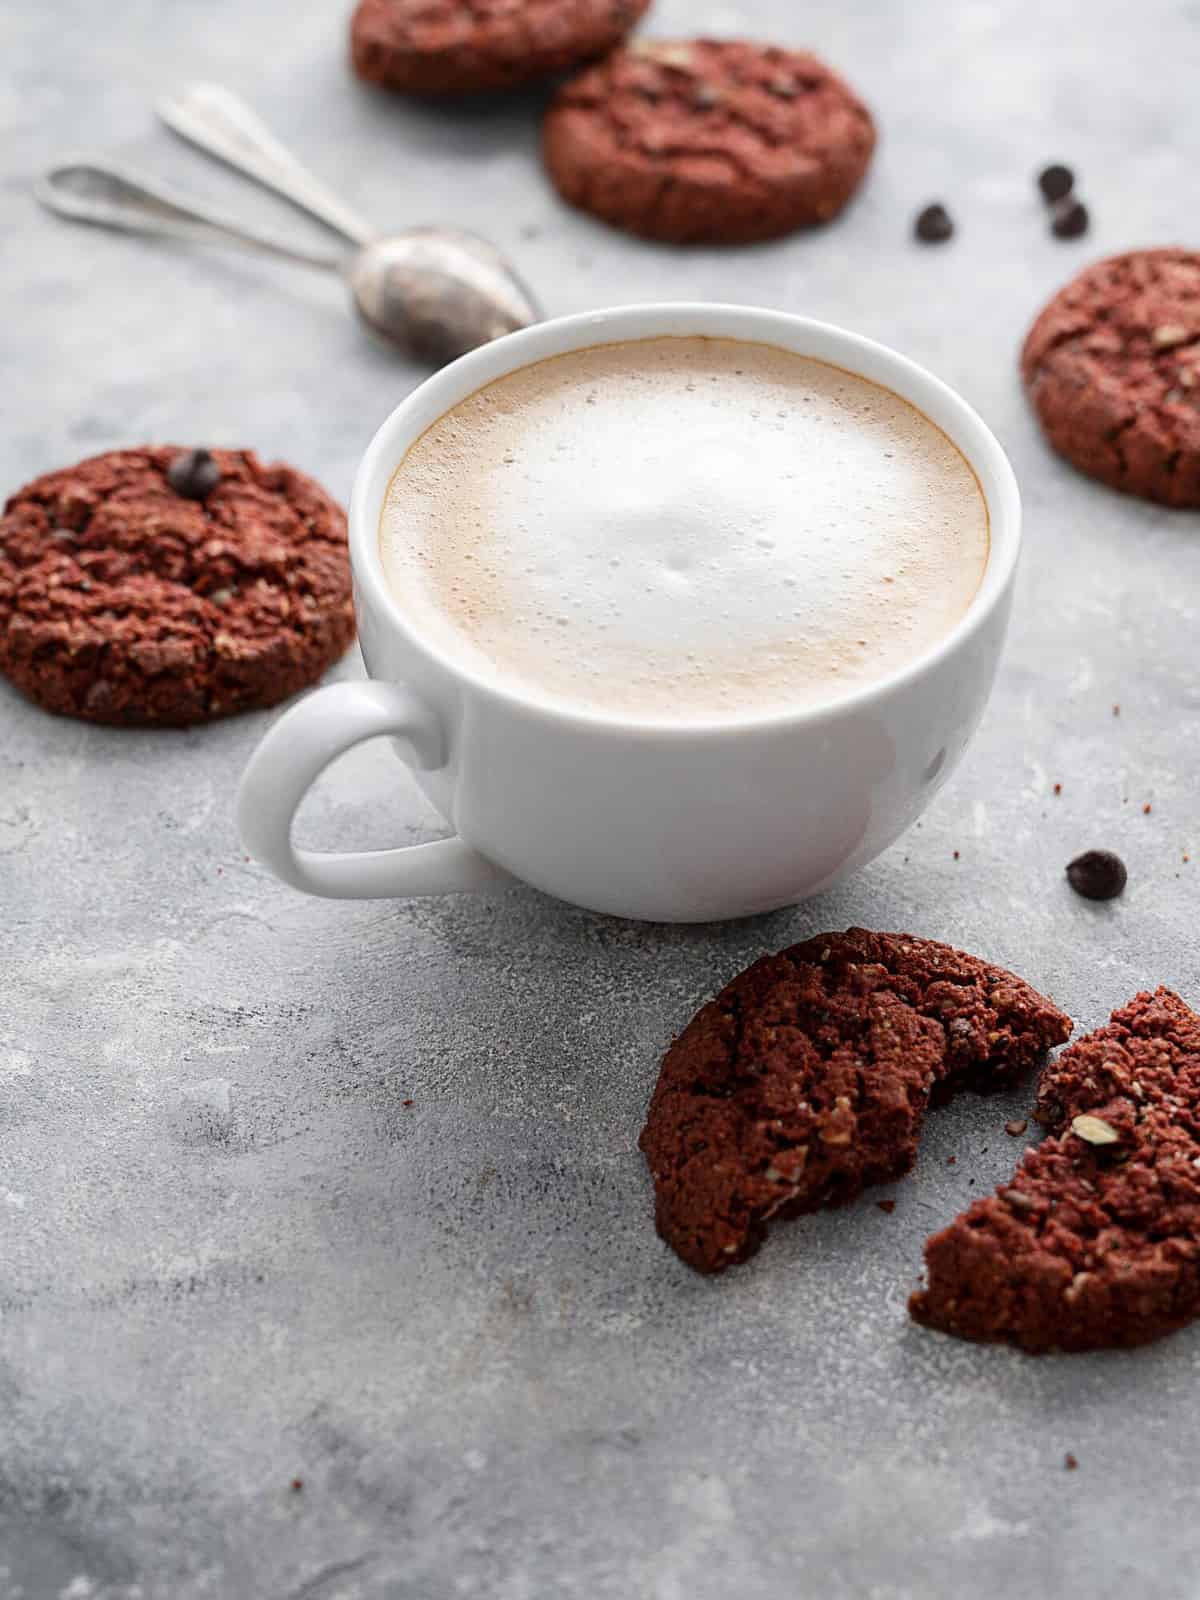 Coffee and cookies. Oat, healthy cookies and coffee cup, breakfast concept. Copy space.